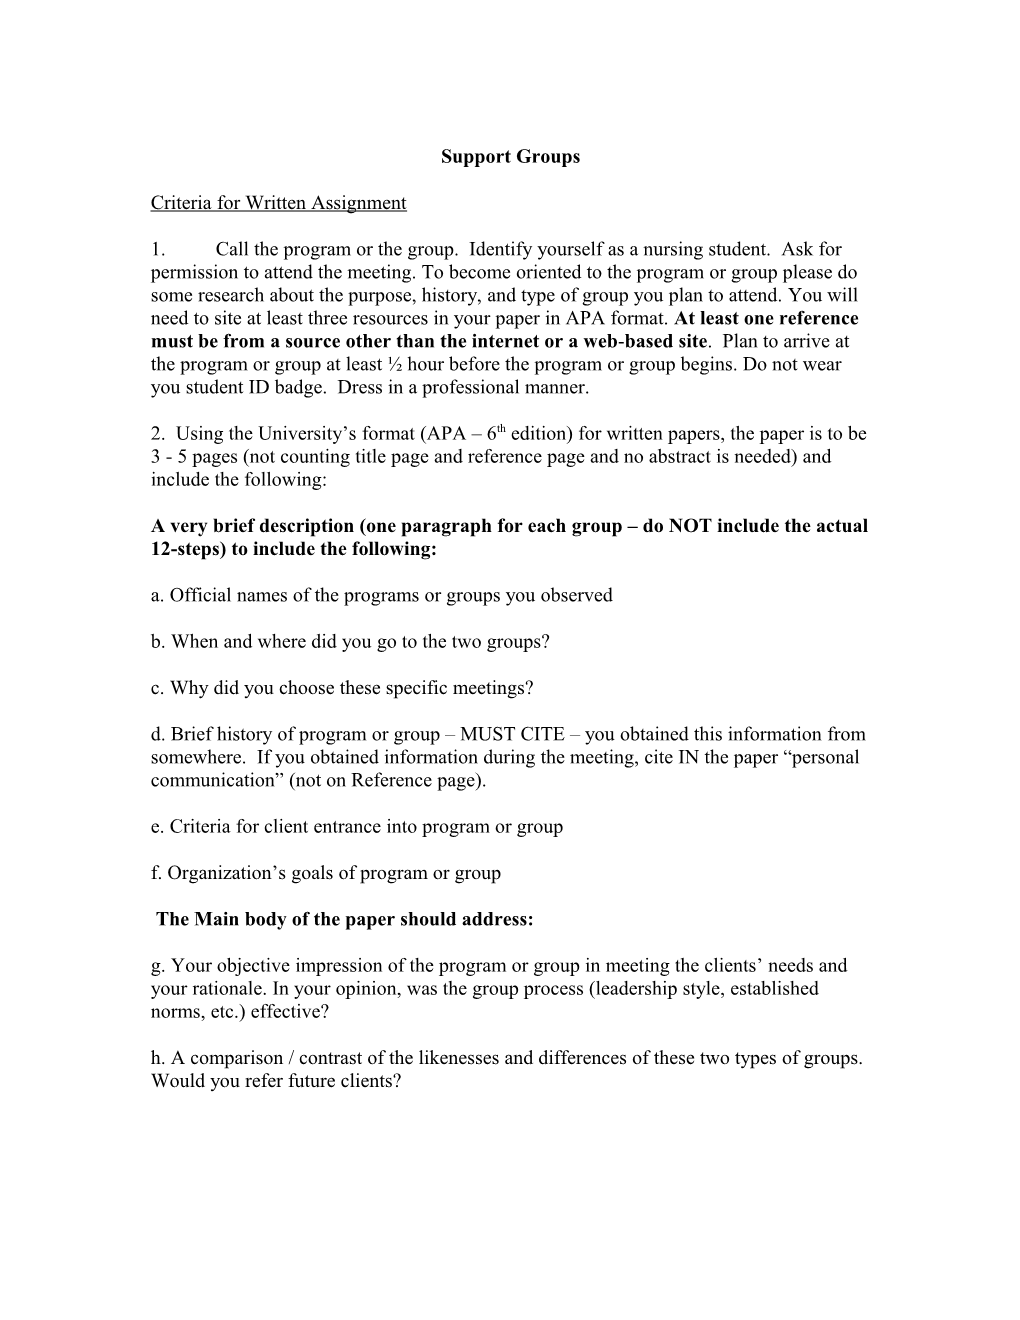 12-Step and Support Group Assignment